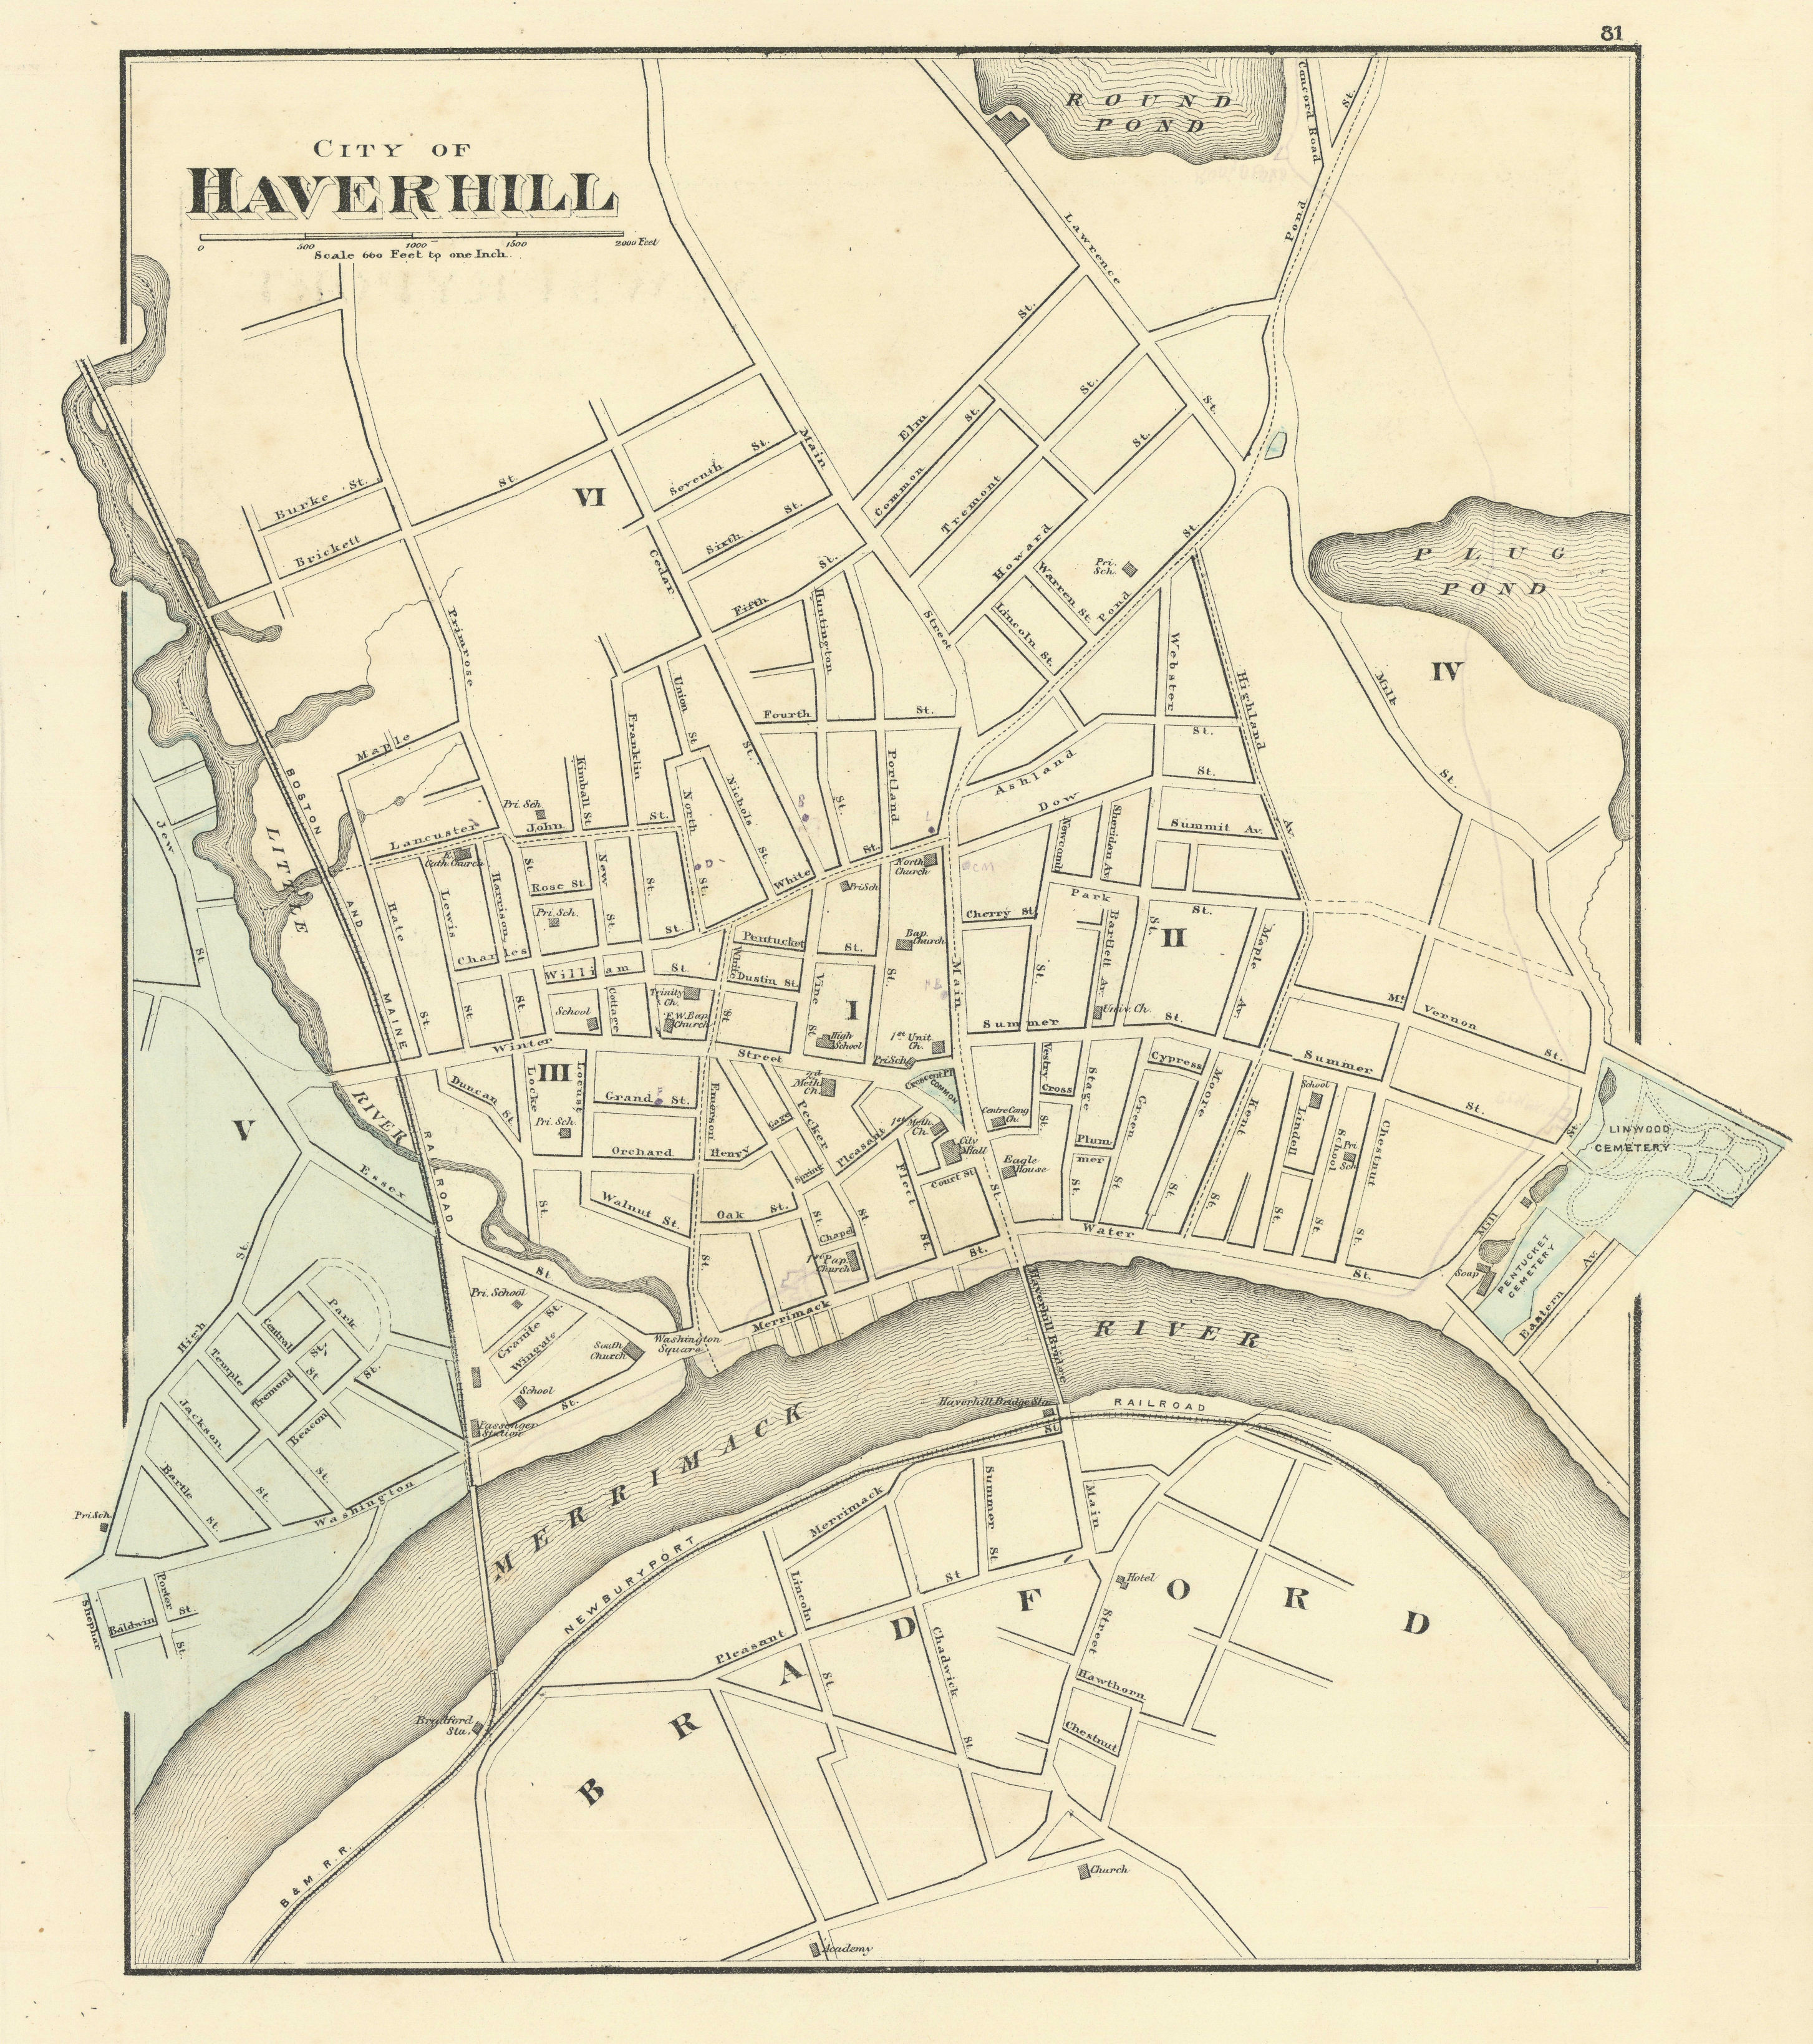 Associate Product City of Haverhill, Massachusetts. Town plan. WALLING & GRAY 1871 old map